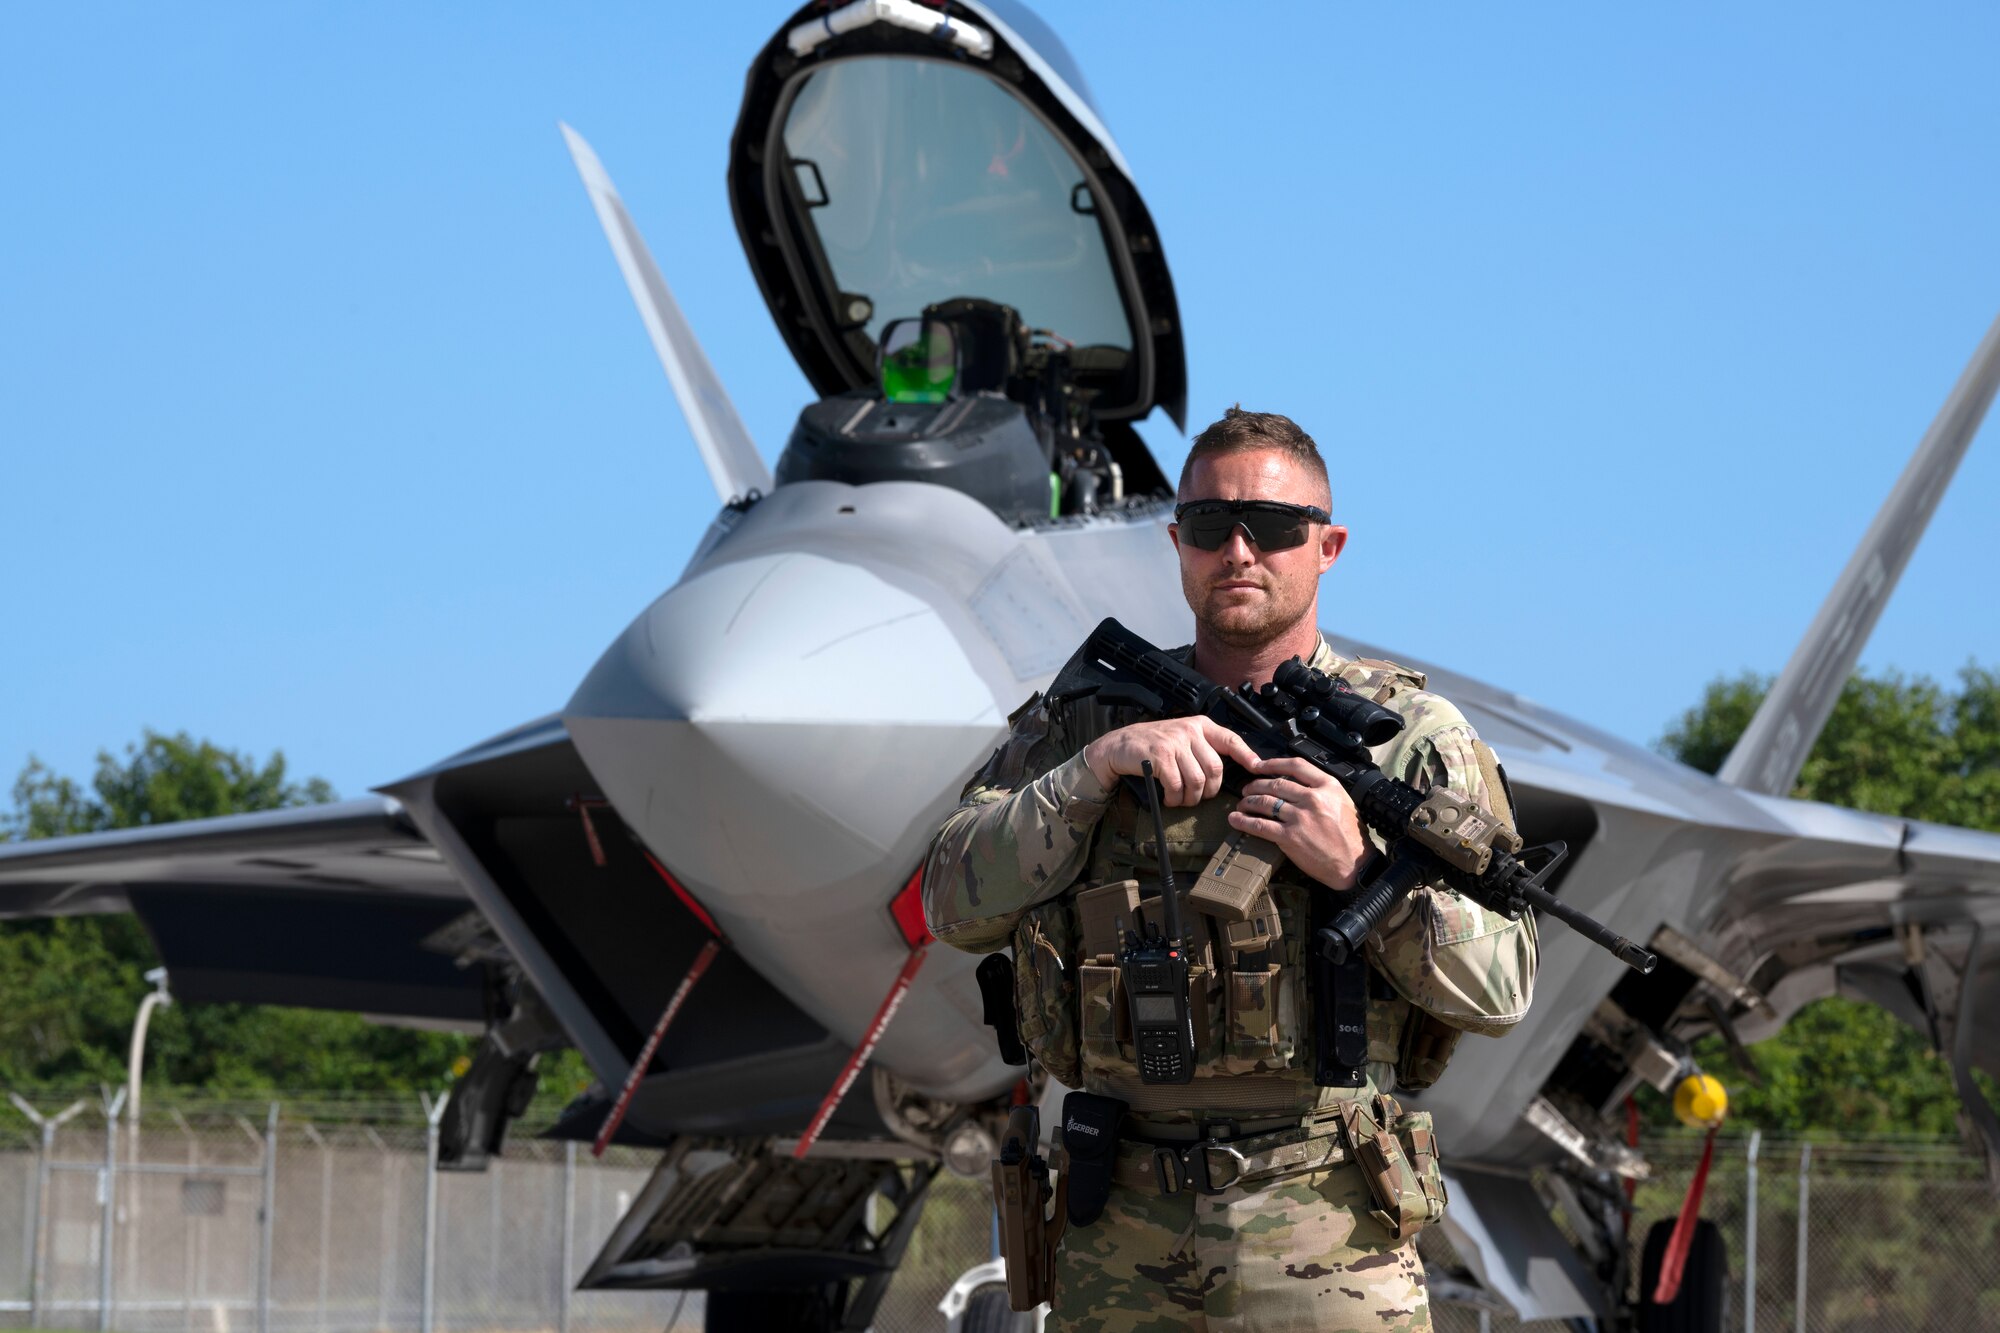 U.S. Air Force Master Sgt. Nicholas Collins, a raven team member assigned to the 121st Security Forces Squadron, guards an F-22 Raptor assigned to the 192nd Wing, Virginia Air National Guard, during Operation Hoodoo Sea at Muñiz Air National Guard Base, Carolina, Puerto Rico, May 4, 2023. Operation Hoodoo Sea is a multi-unit training exercise where participant units conduct agile combat training in the coastal southeast of the U.S. to test agile communications innovations, portable aerospace ground equipment, aircraft concealment hangars and survival kits. (U.S. Air National Guard photo by Master Sgt. Rafael Rosa)